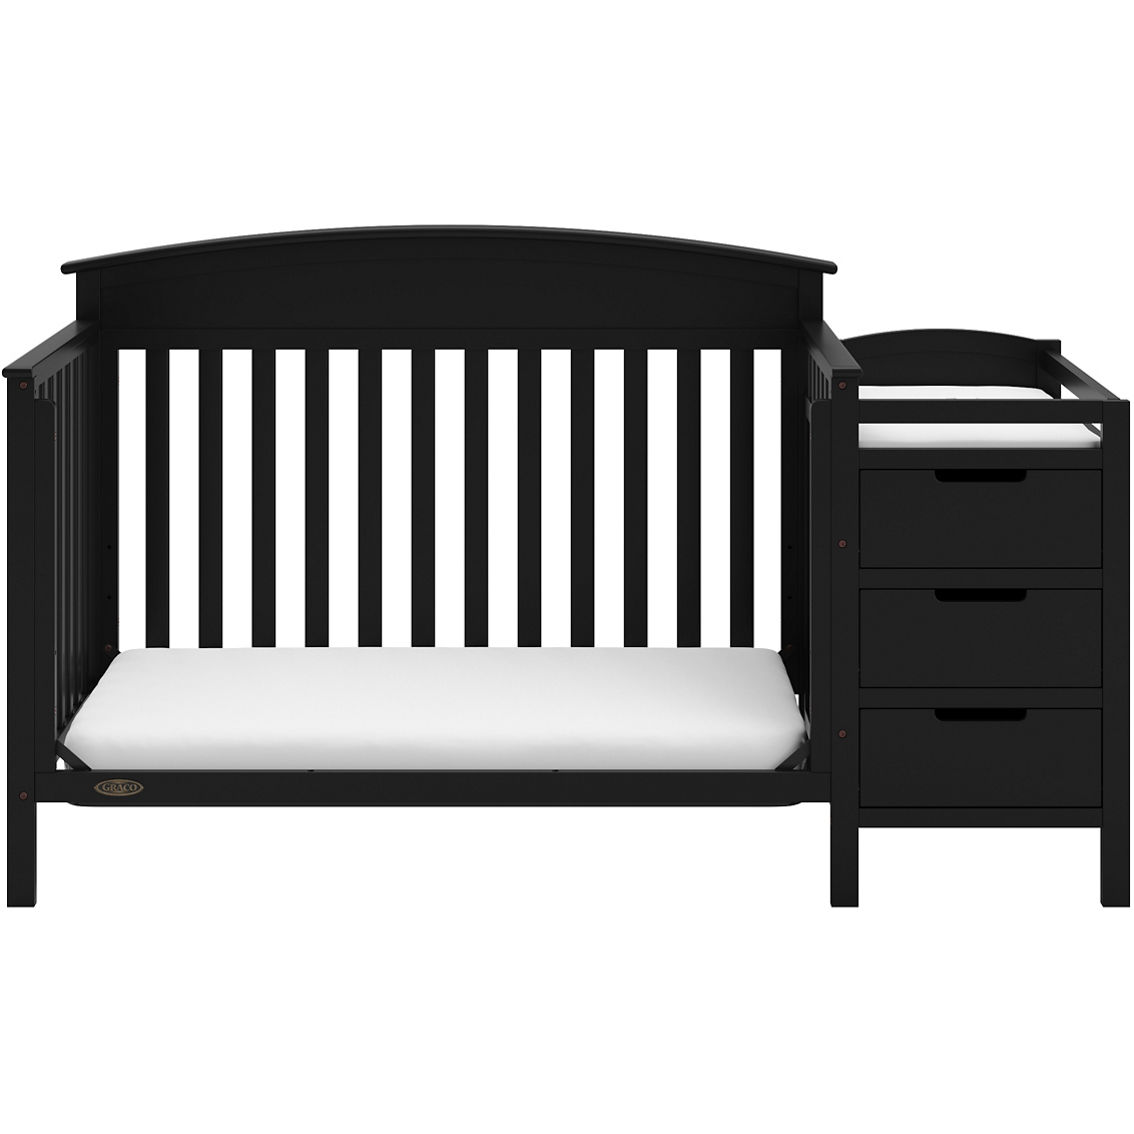 Graco Benton 4 in 1 Convertible Crib and Changer - Image 4 of 8